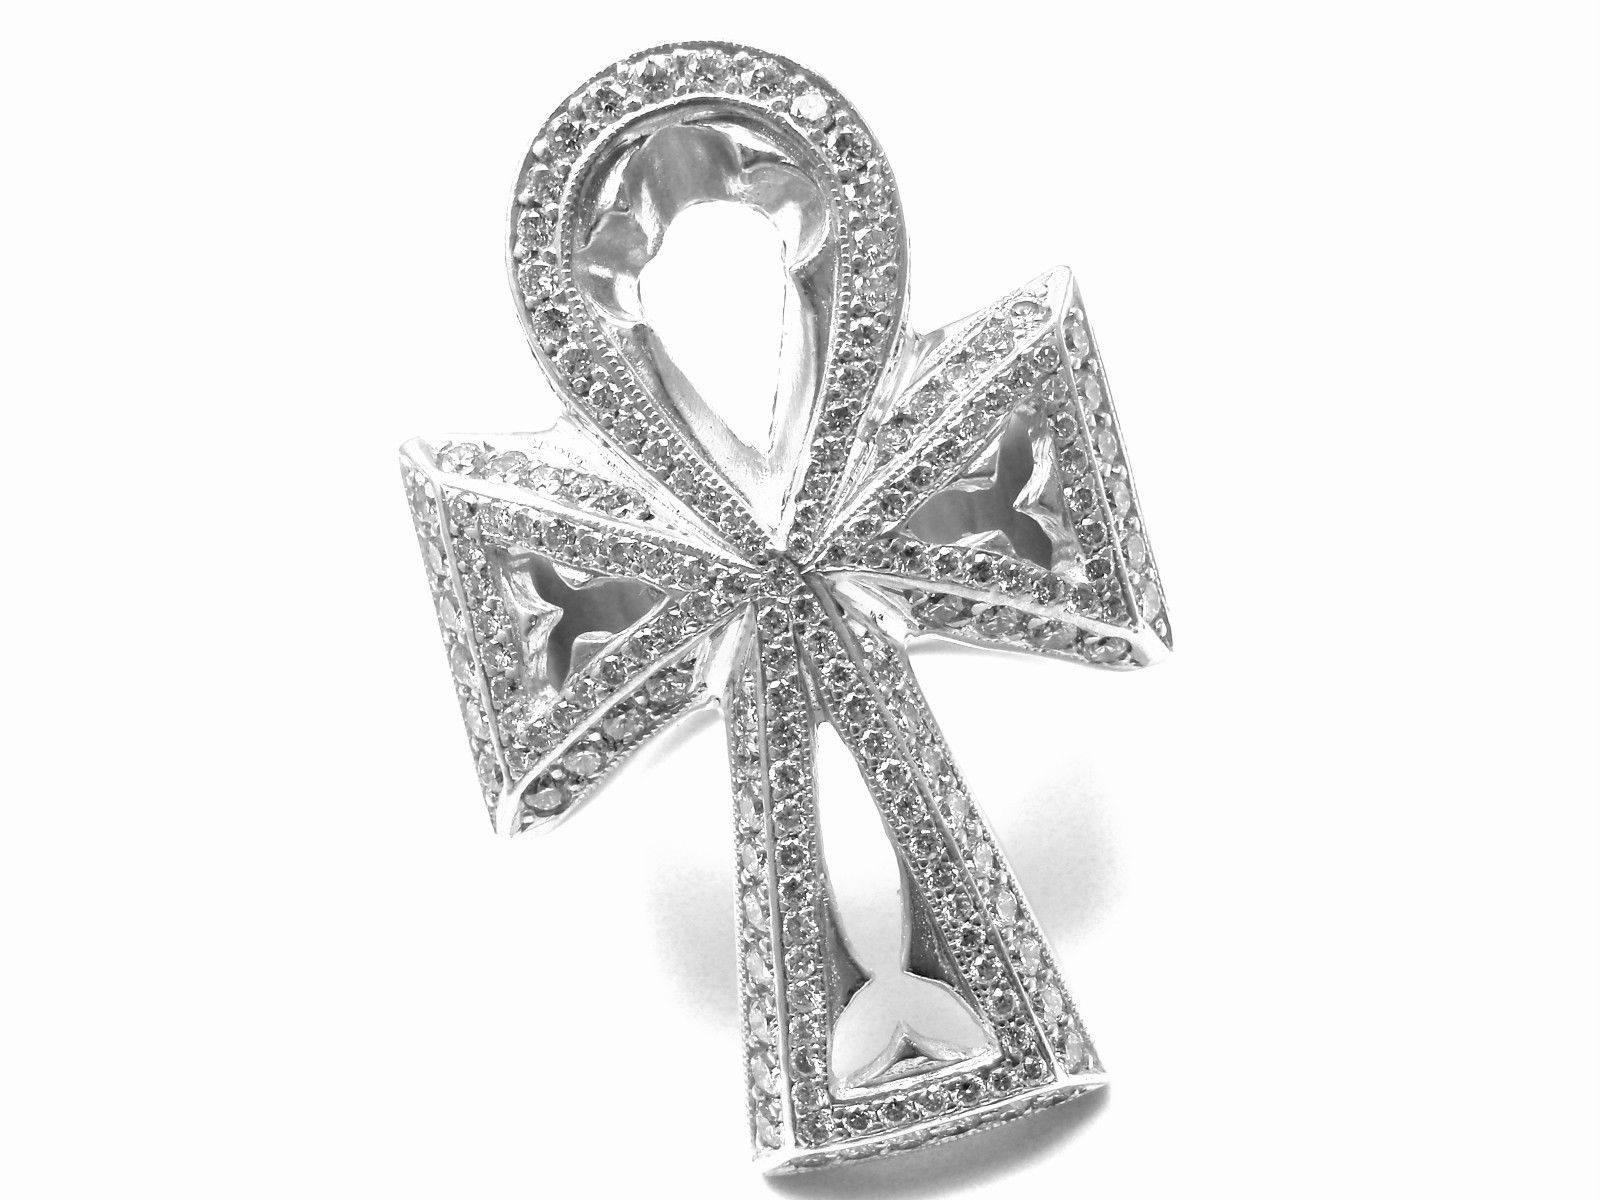 18k White Gold Diamond Large Quatrefoil Ankh RIng by Loree Rodkin. 
With  Round brilliant cut diamonds estimated total diamond weight 1.35cts
This ring used to belong to Jackie Collins and was 
purchased from her jewelry estate collection.

Details: